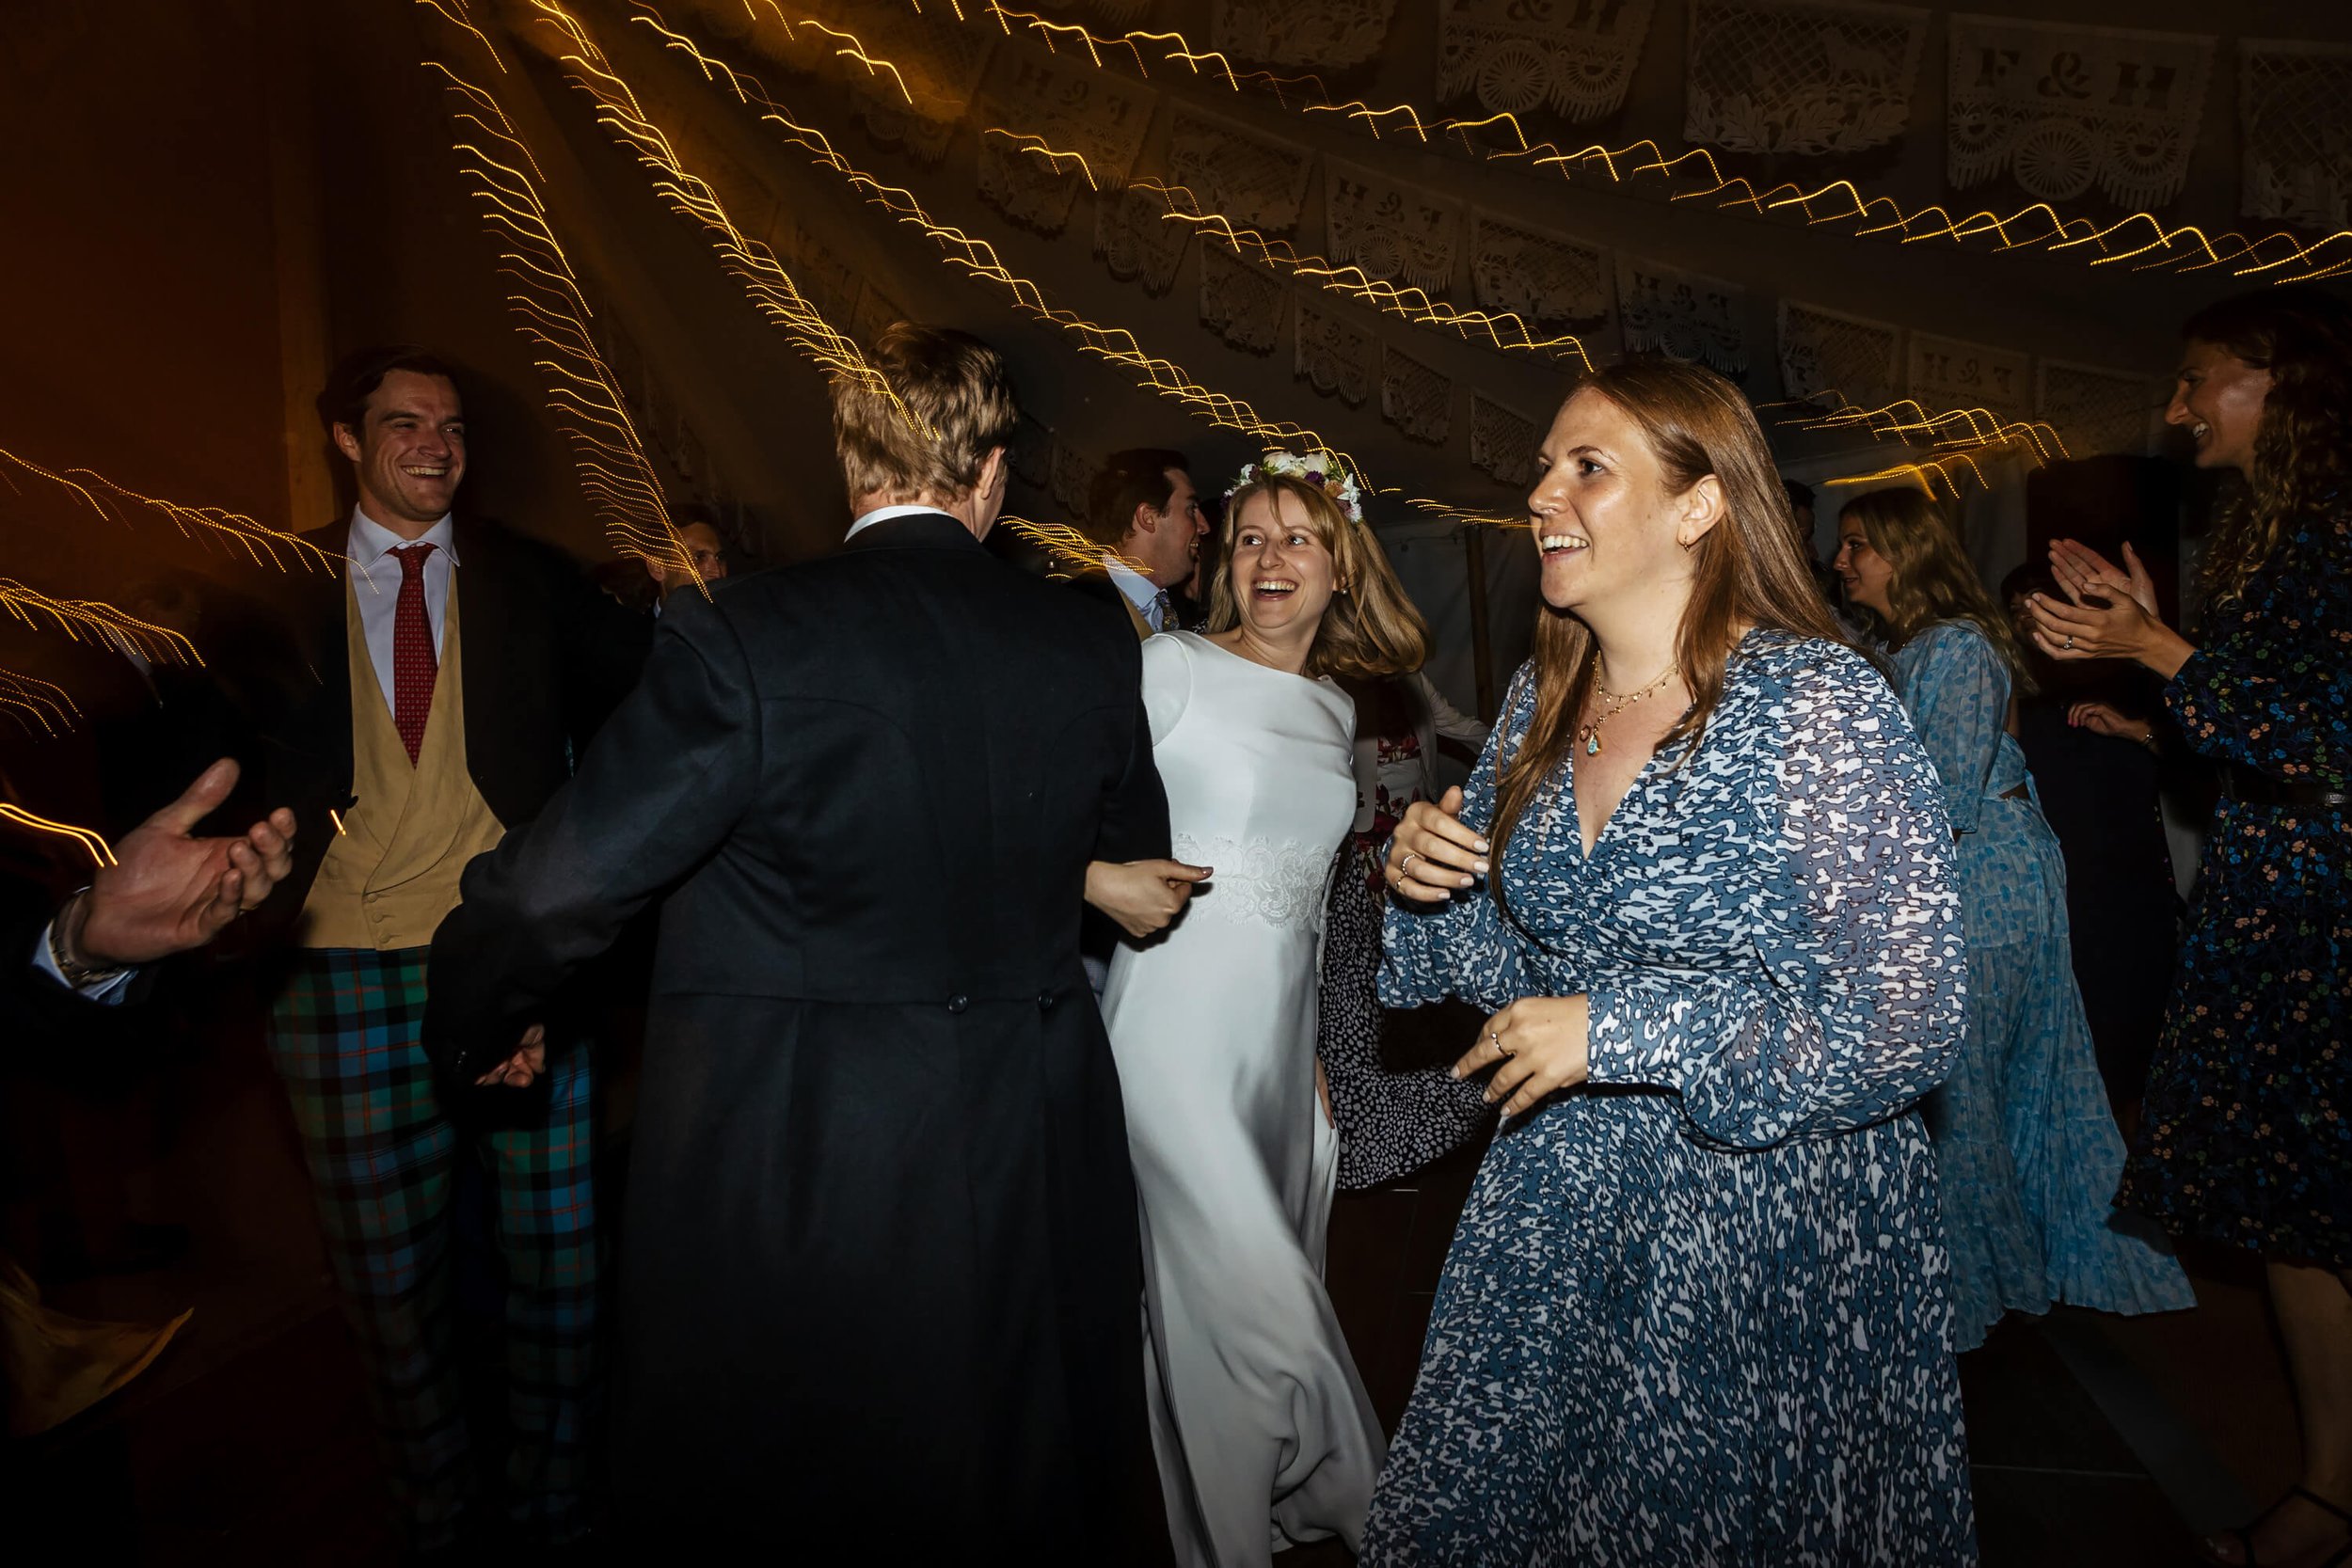 Bride ceilidh dancing with her wedding guests